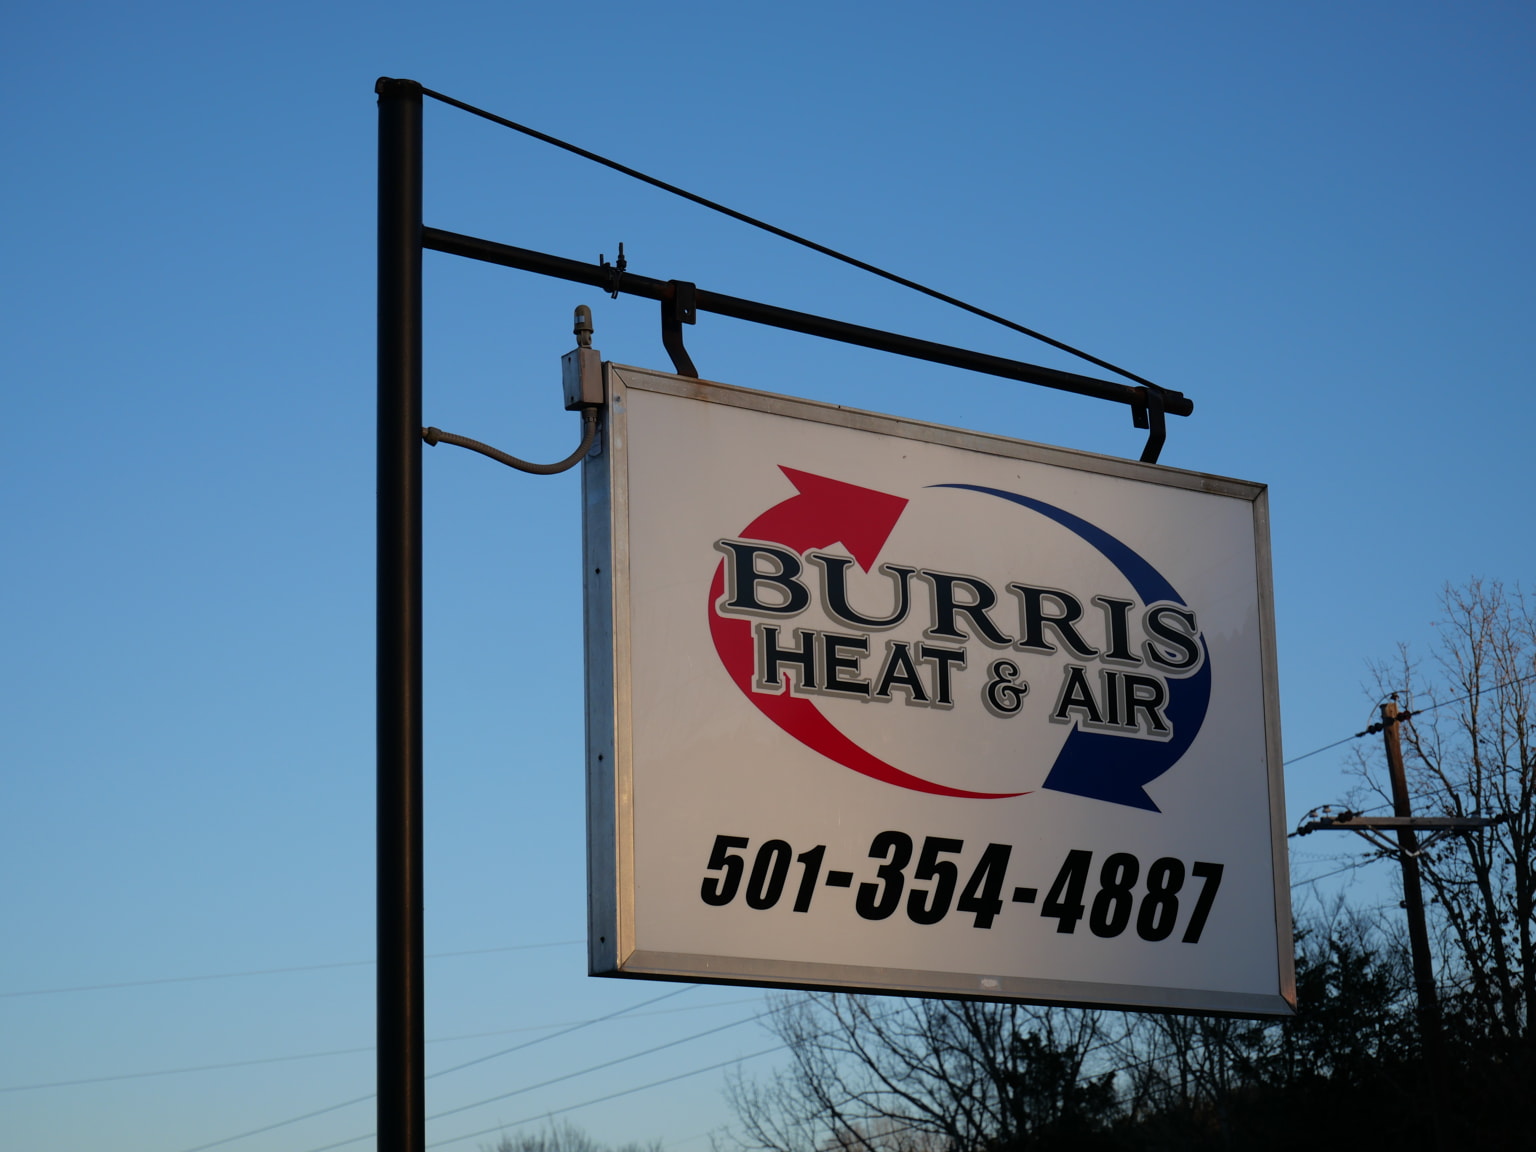 Burris Heat & Air sign with the business logo.